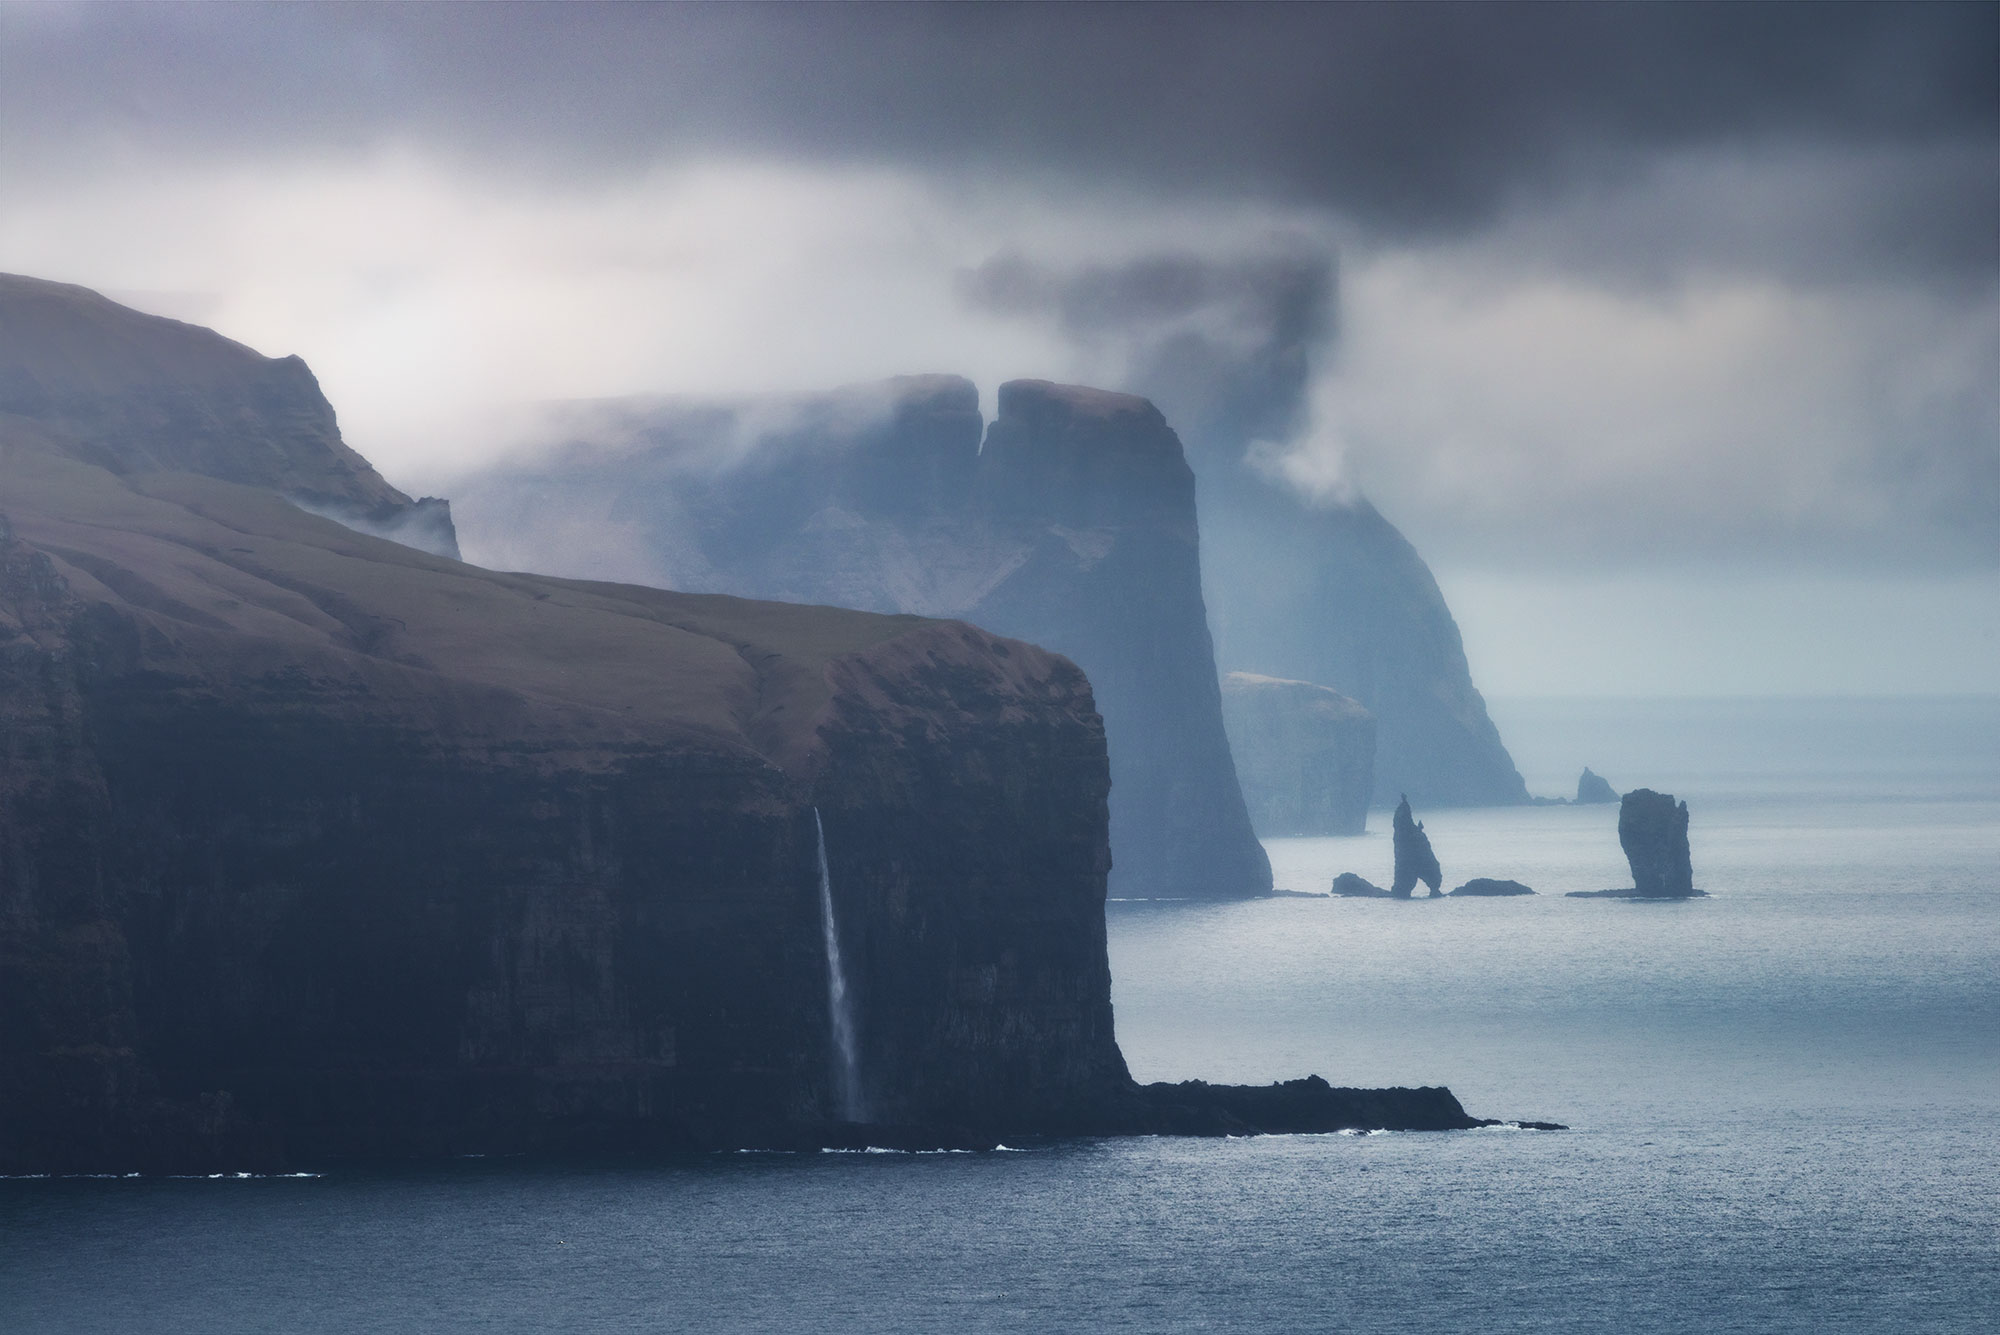 Misty and moody landscape of the Faroe Islands seen from the Kallur Lighthouse.